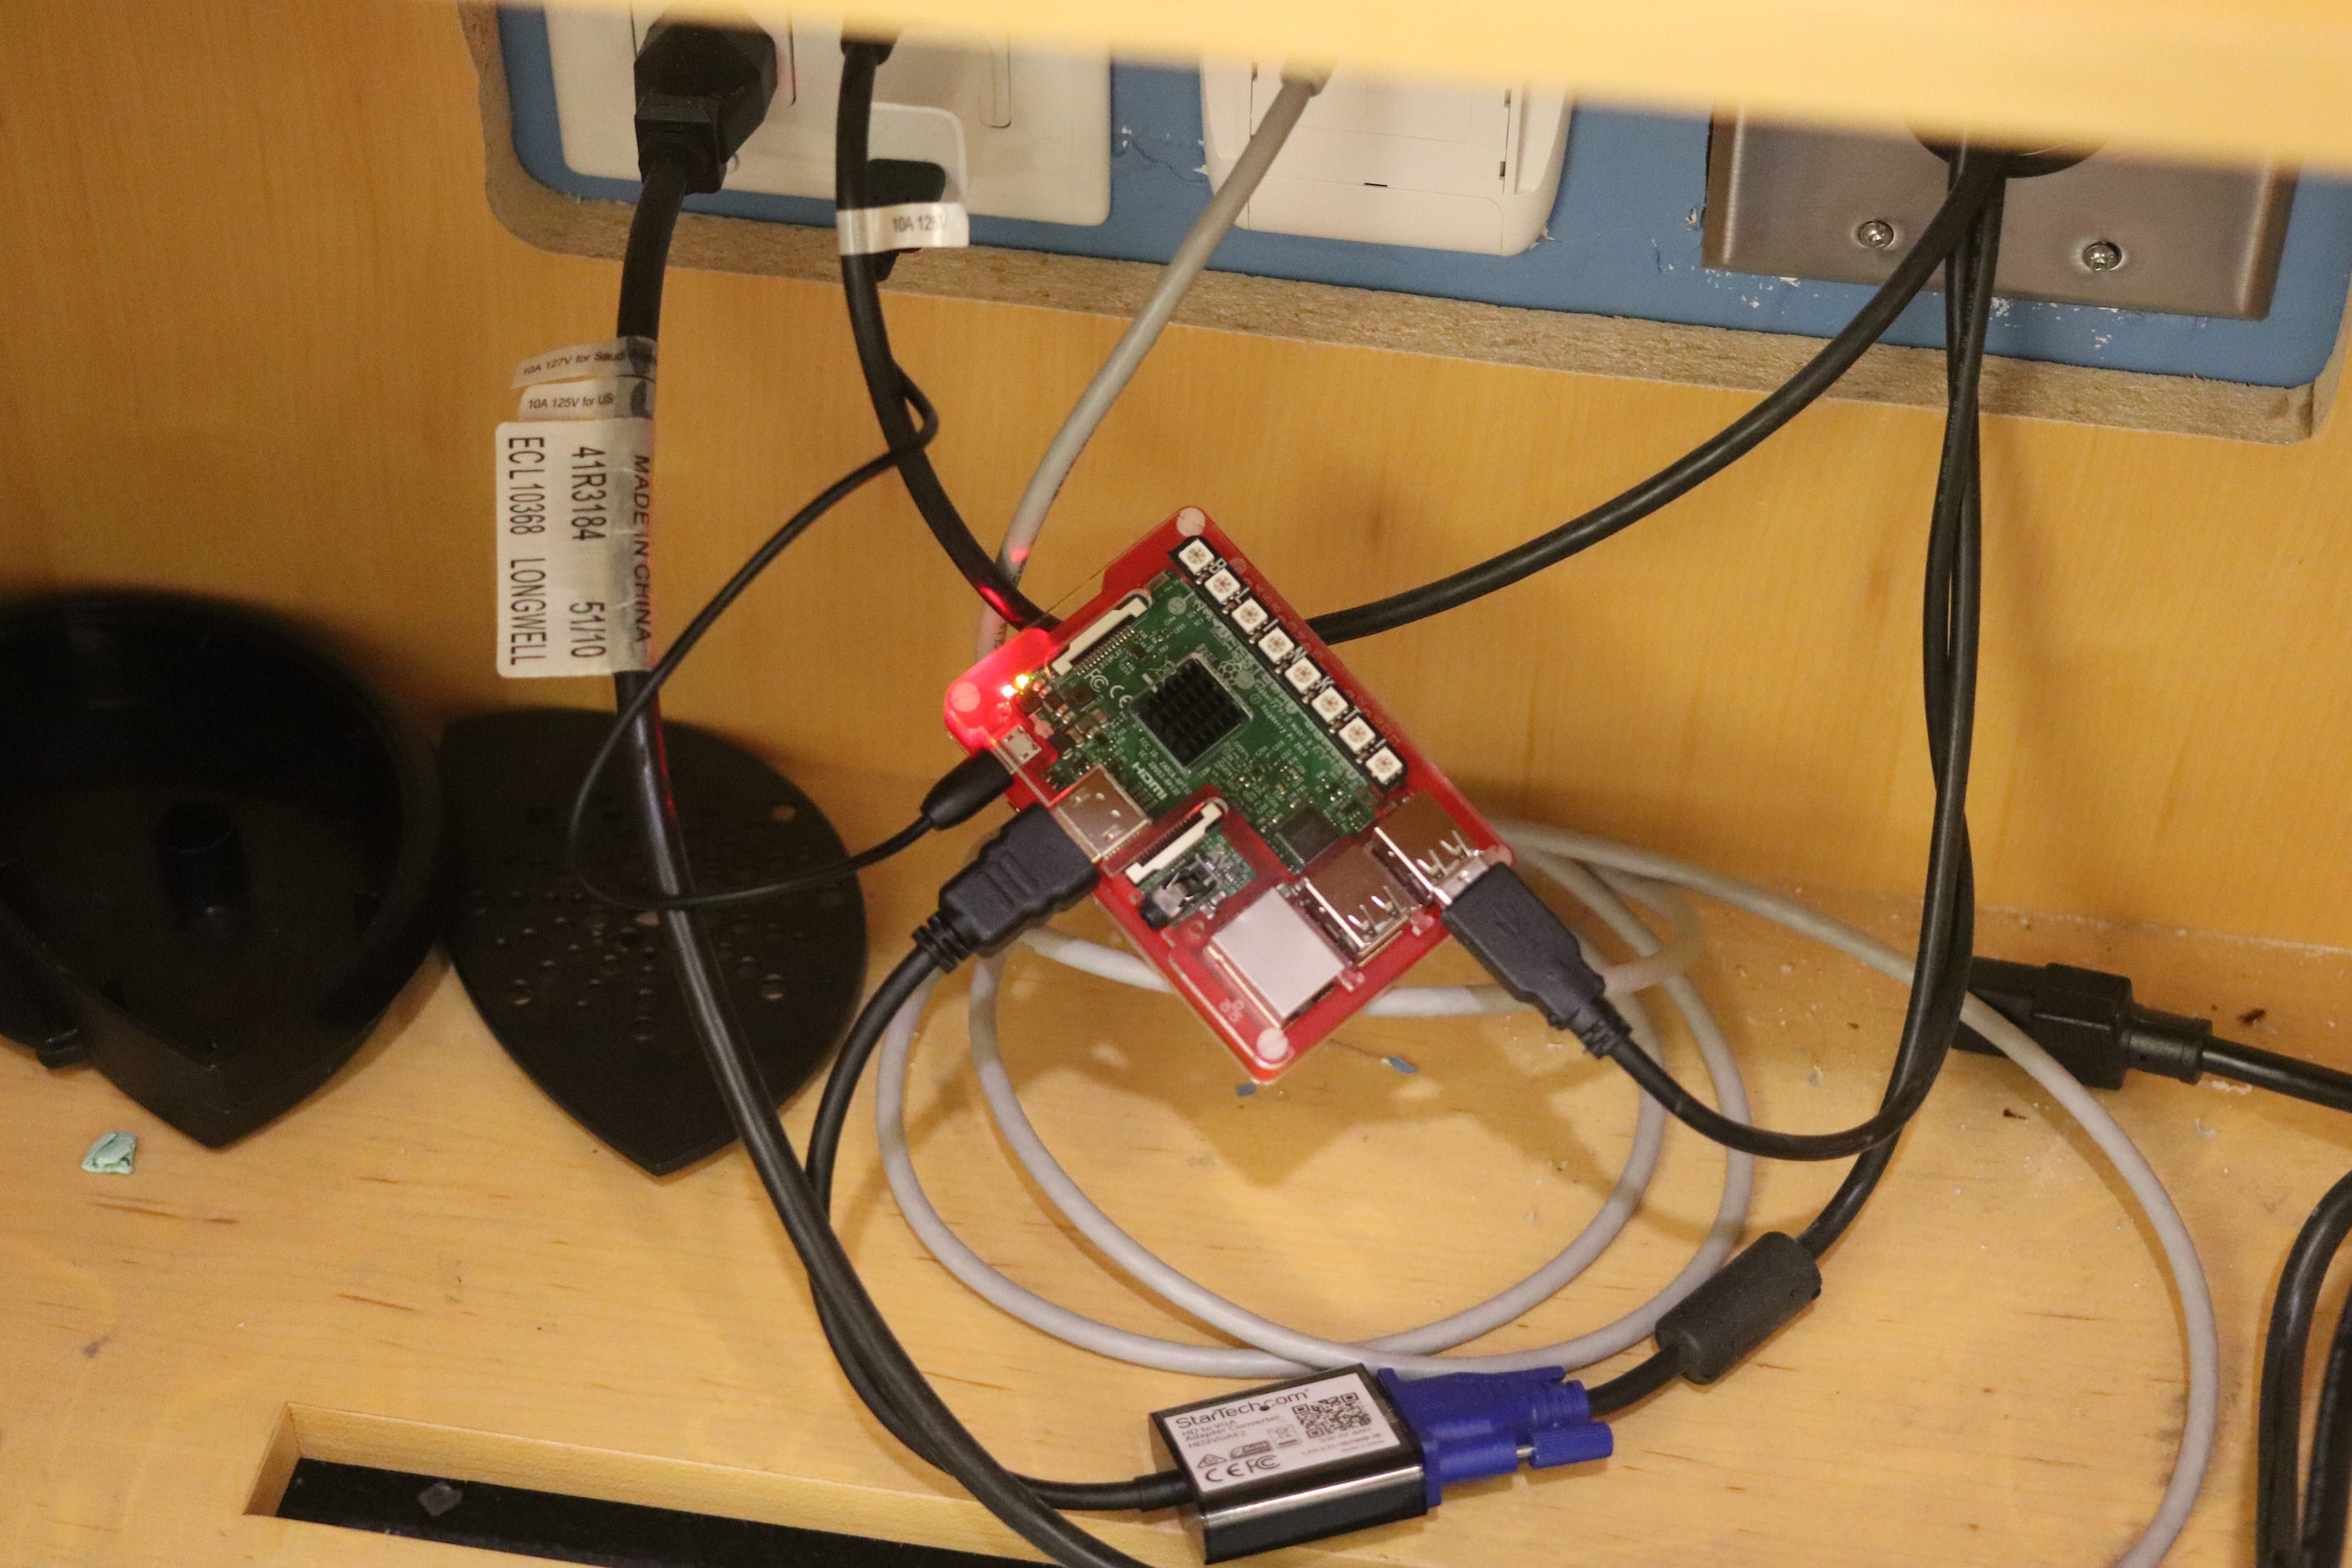 The VGA adapter, power brick, USB cable all plugged into the Raspberry Pi, inside the cabinet, looking messy.